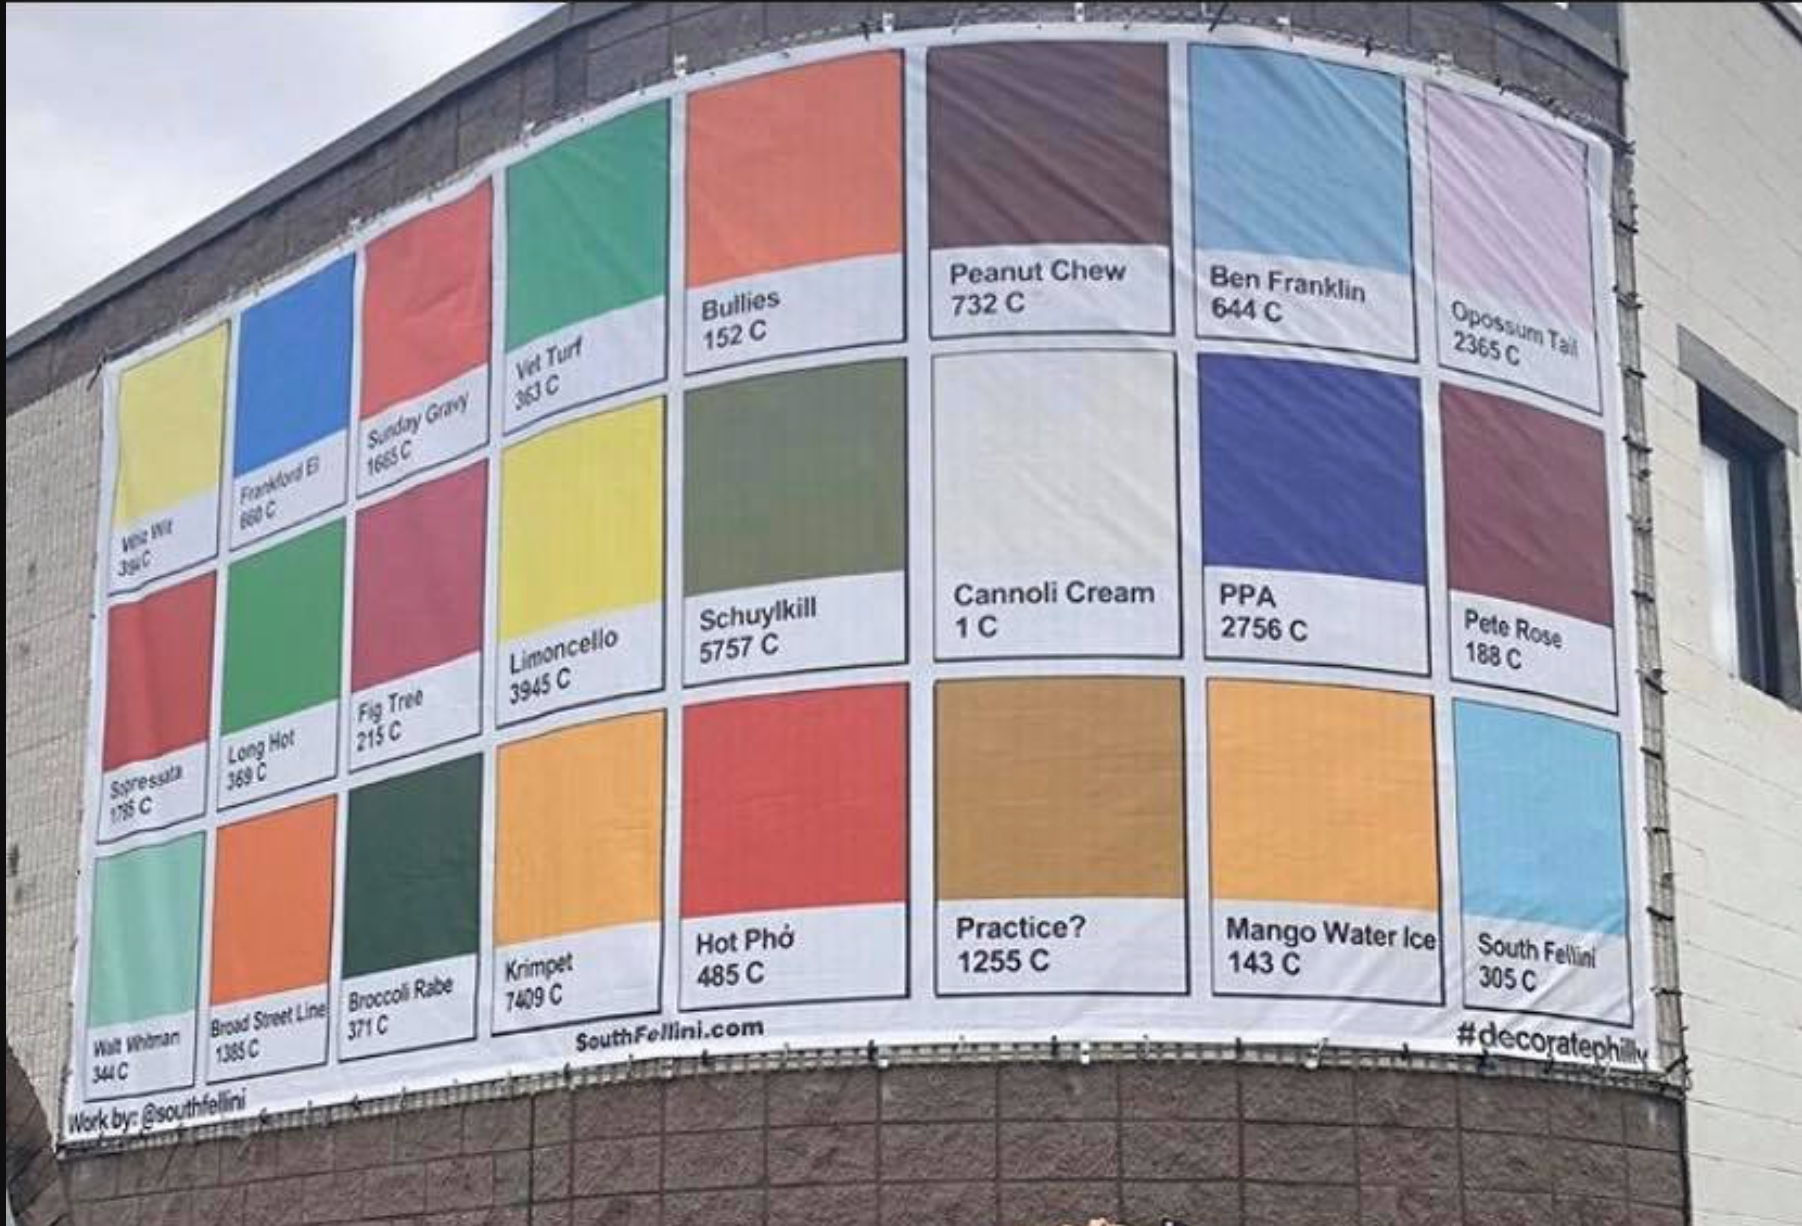 "Palette of Philadelphia" Our 25 x 12.25 foot billboard, printed by Color Reflections (2017)